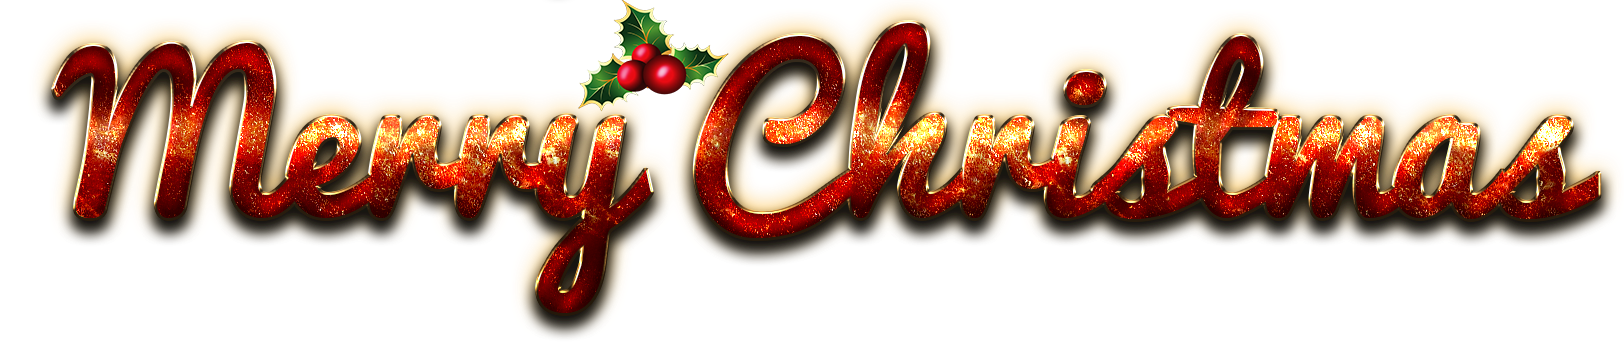 Merry Christmas Letter PNG Free Download